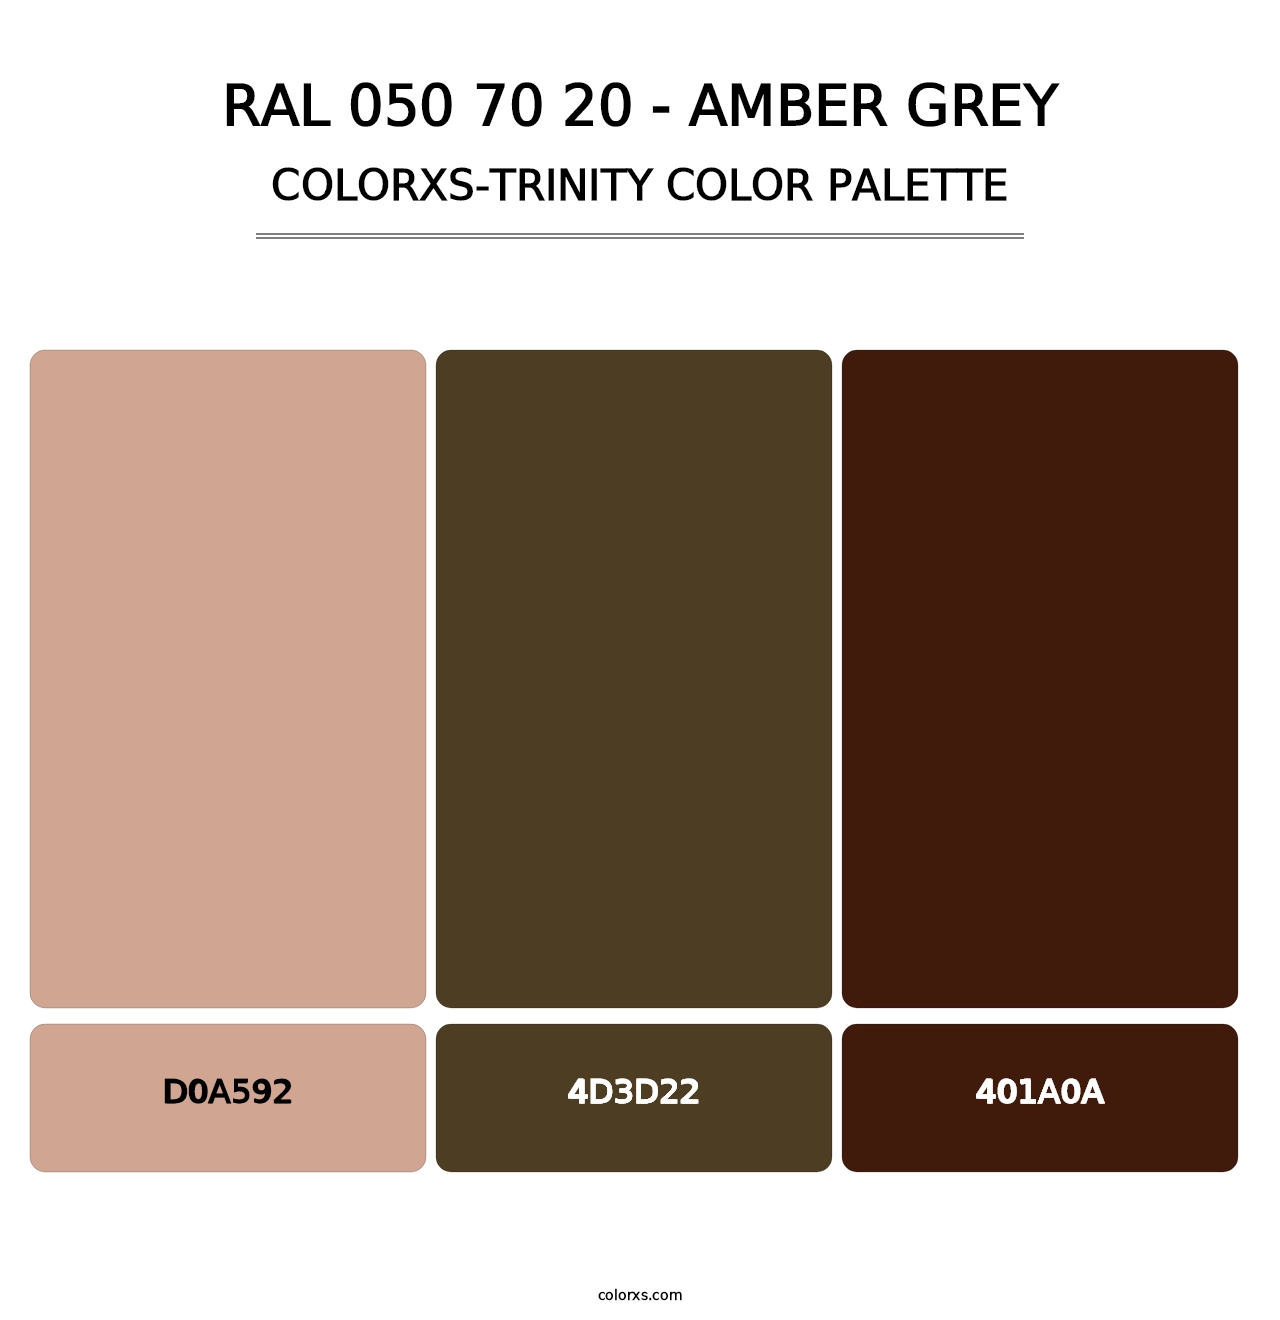 RAL 050 70 20 - Amber Grey - Colorxs Trinity Palette